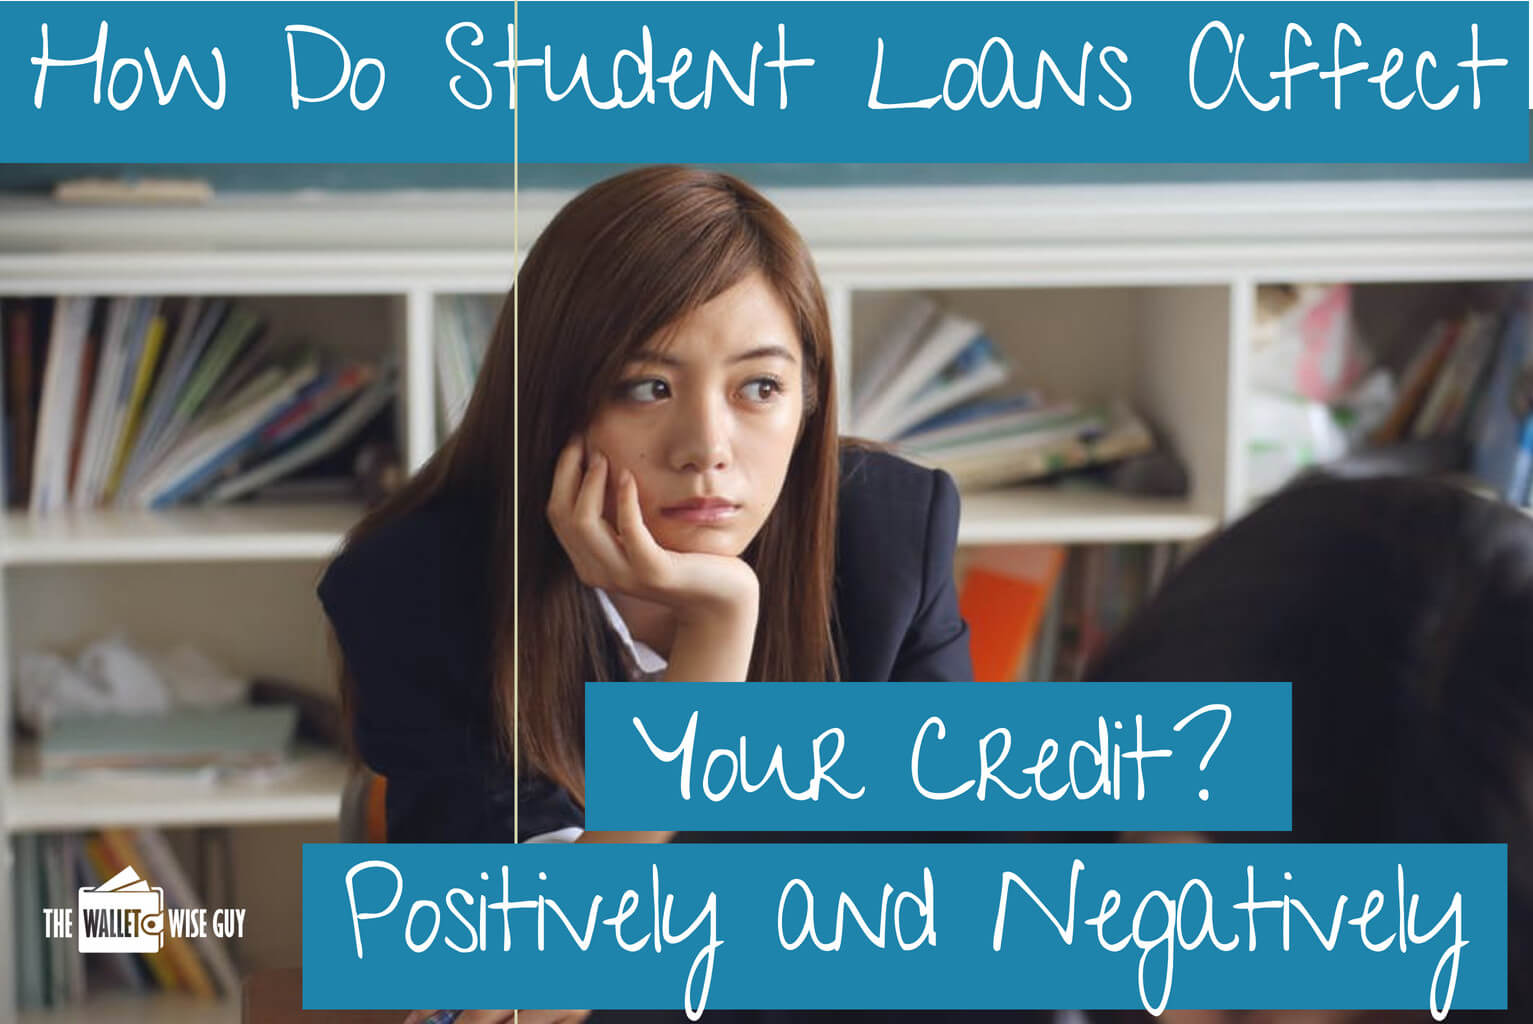 How Do Student Loans Affect Your Credit? (Positively and Negatively